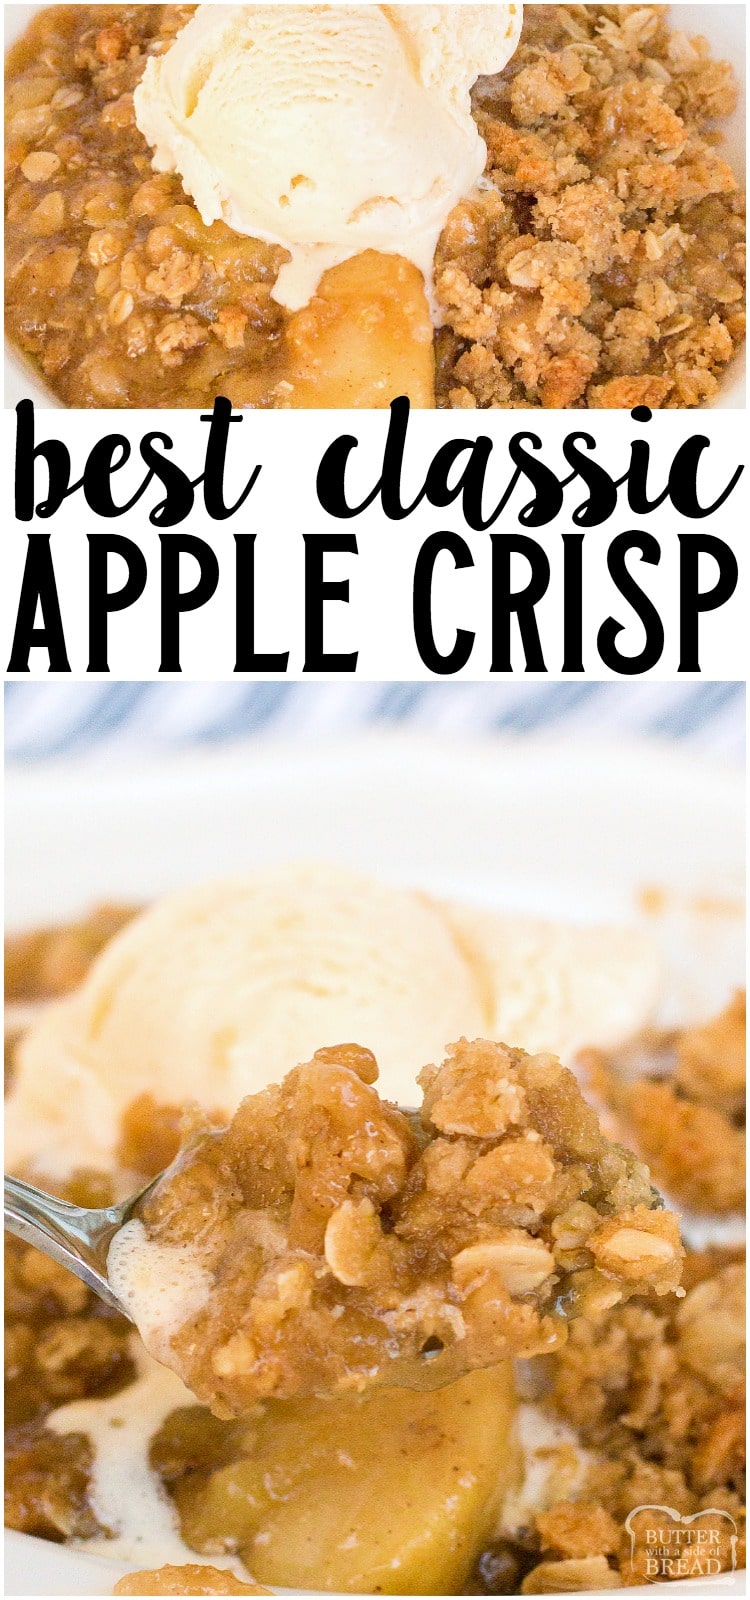 With just a few simple ingredients, you will be enjoying this delicious, mouth watering Easy Apple Crisp Recipe in no time at all. This apple crisp with oatmeal makes an incredible apple crisp filling and apple crisp topping that will not be forgotten. #easyapplecrisp #bestapplecrisp #applecrisp #applecrisptopping #recipefrom Butter With a Side of Bread